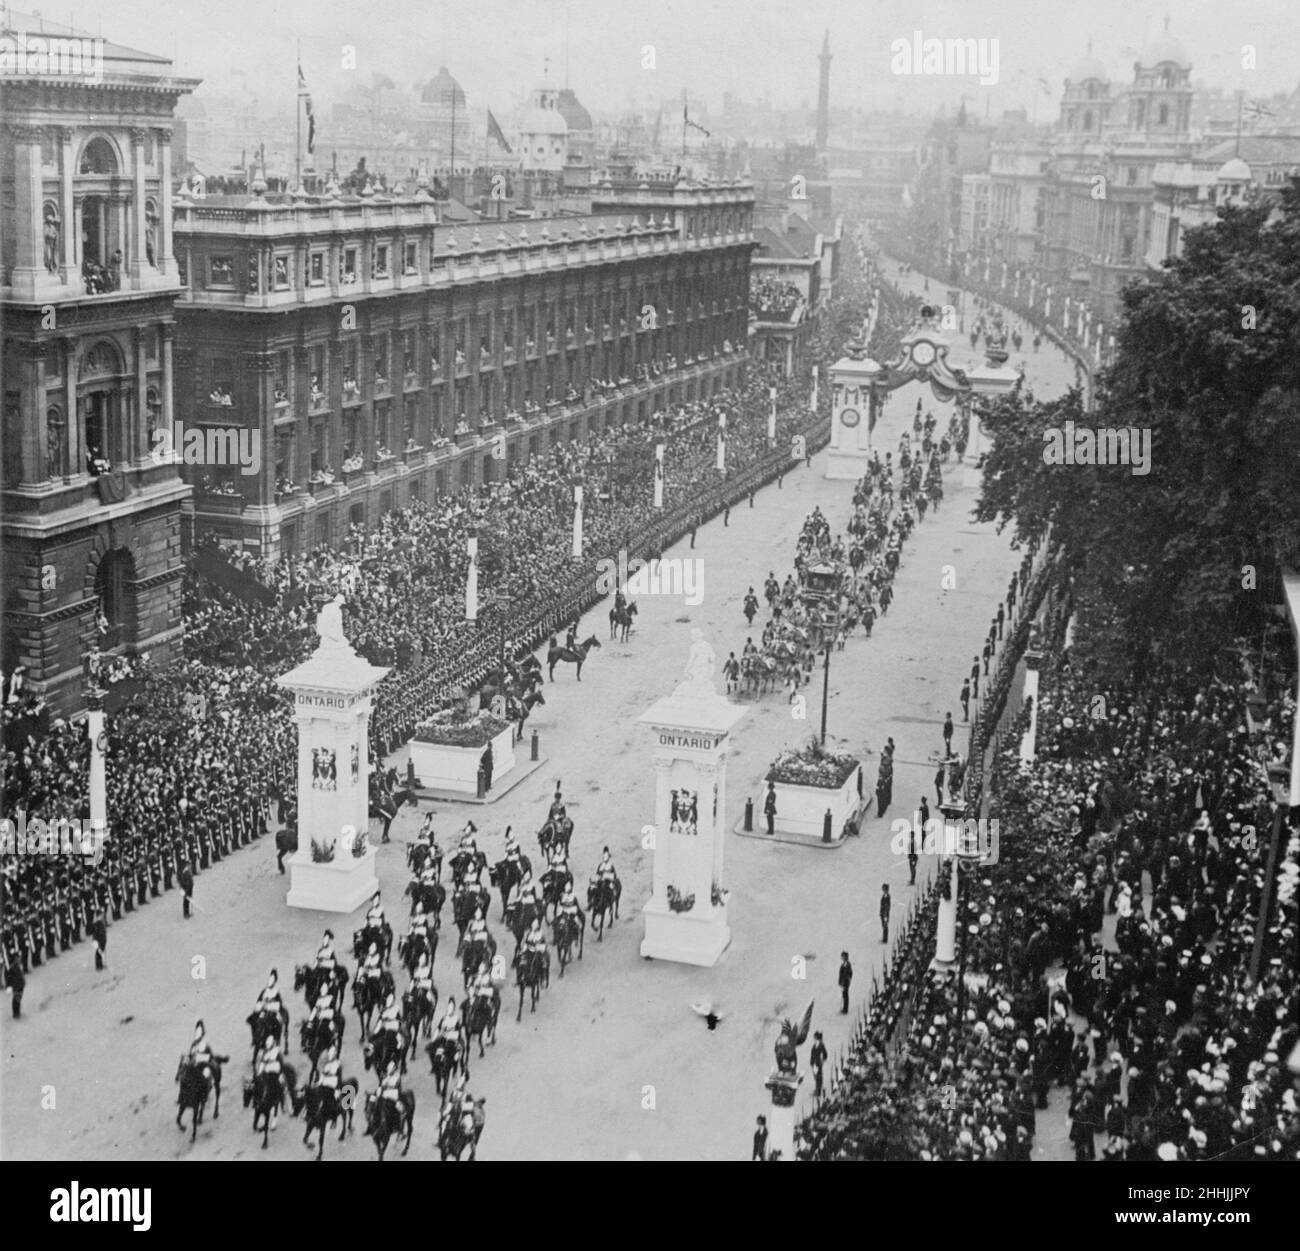 Coronation of King George V. Thousands of people cheer from the side of the road as the procession makes its way along Whitehall. 22nd June 1911. Stock Photo